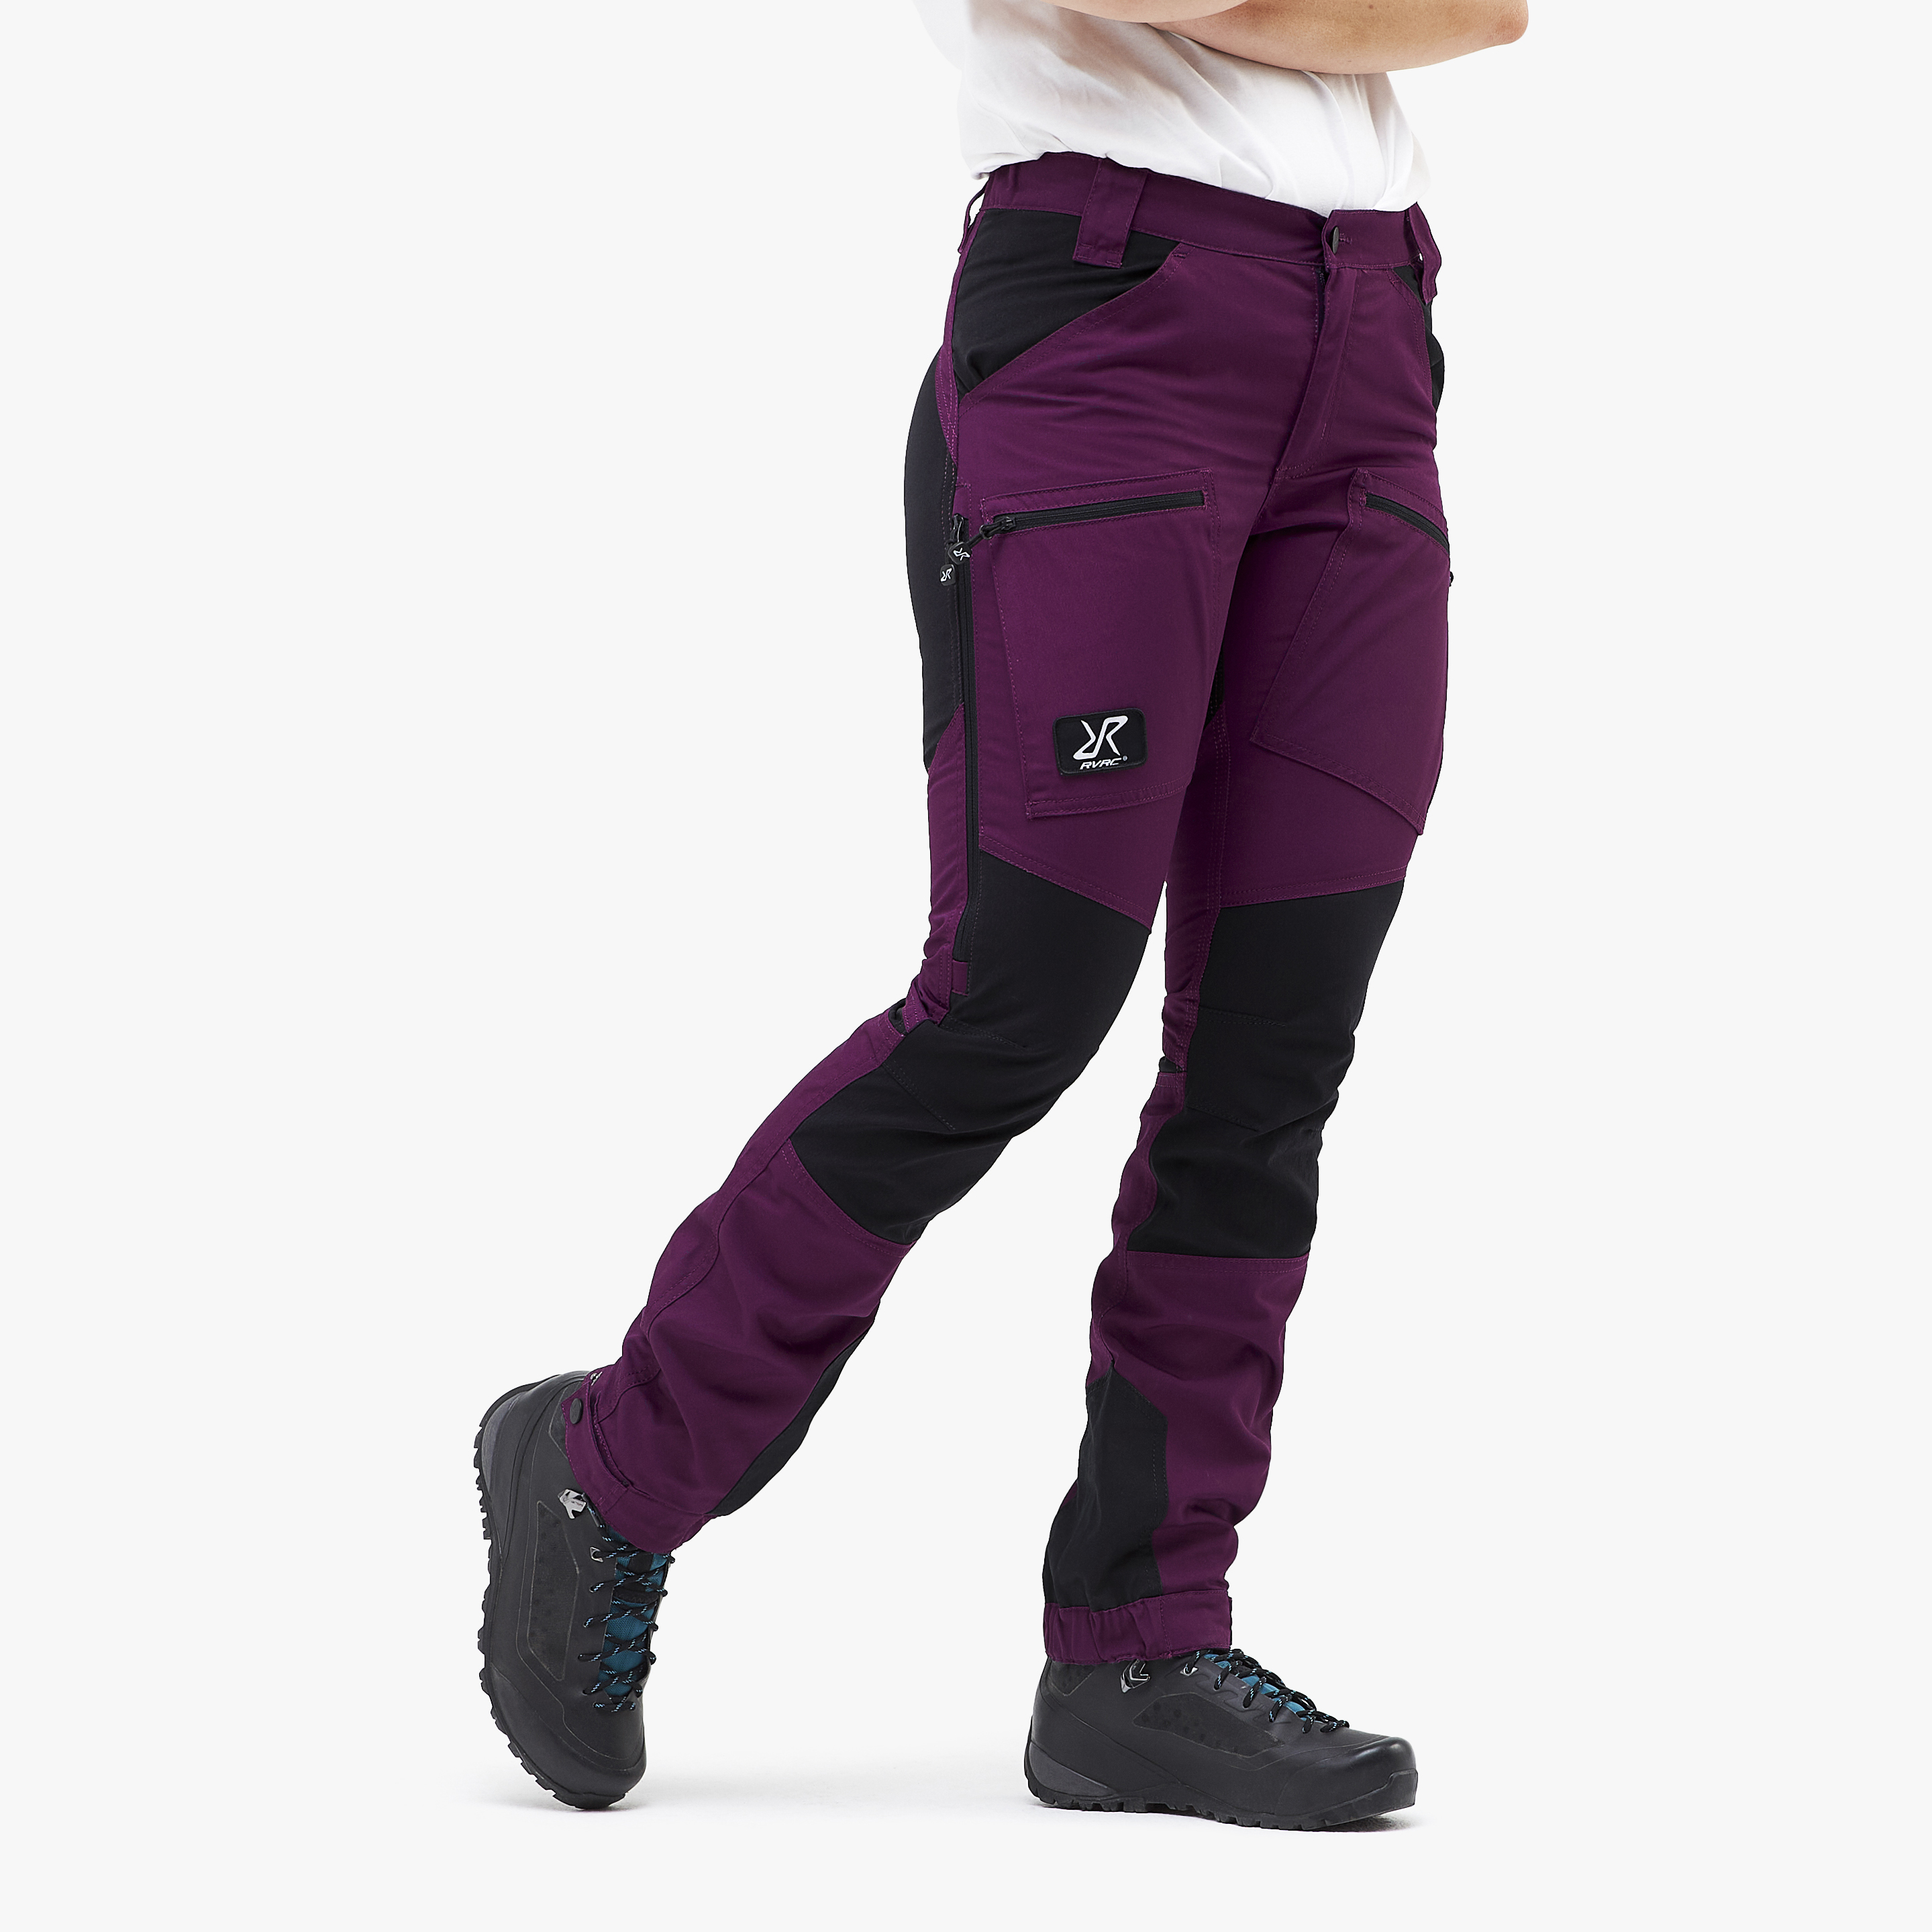 Nordwand Pro Short hiking trousers for women in purple